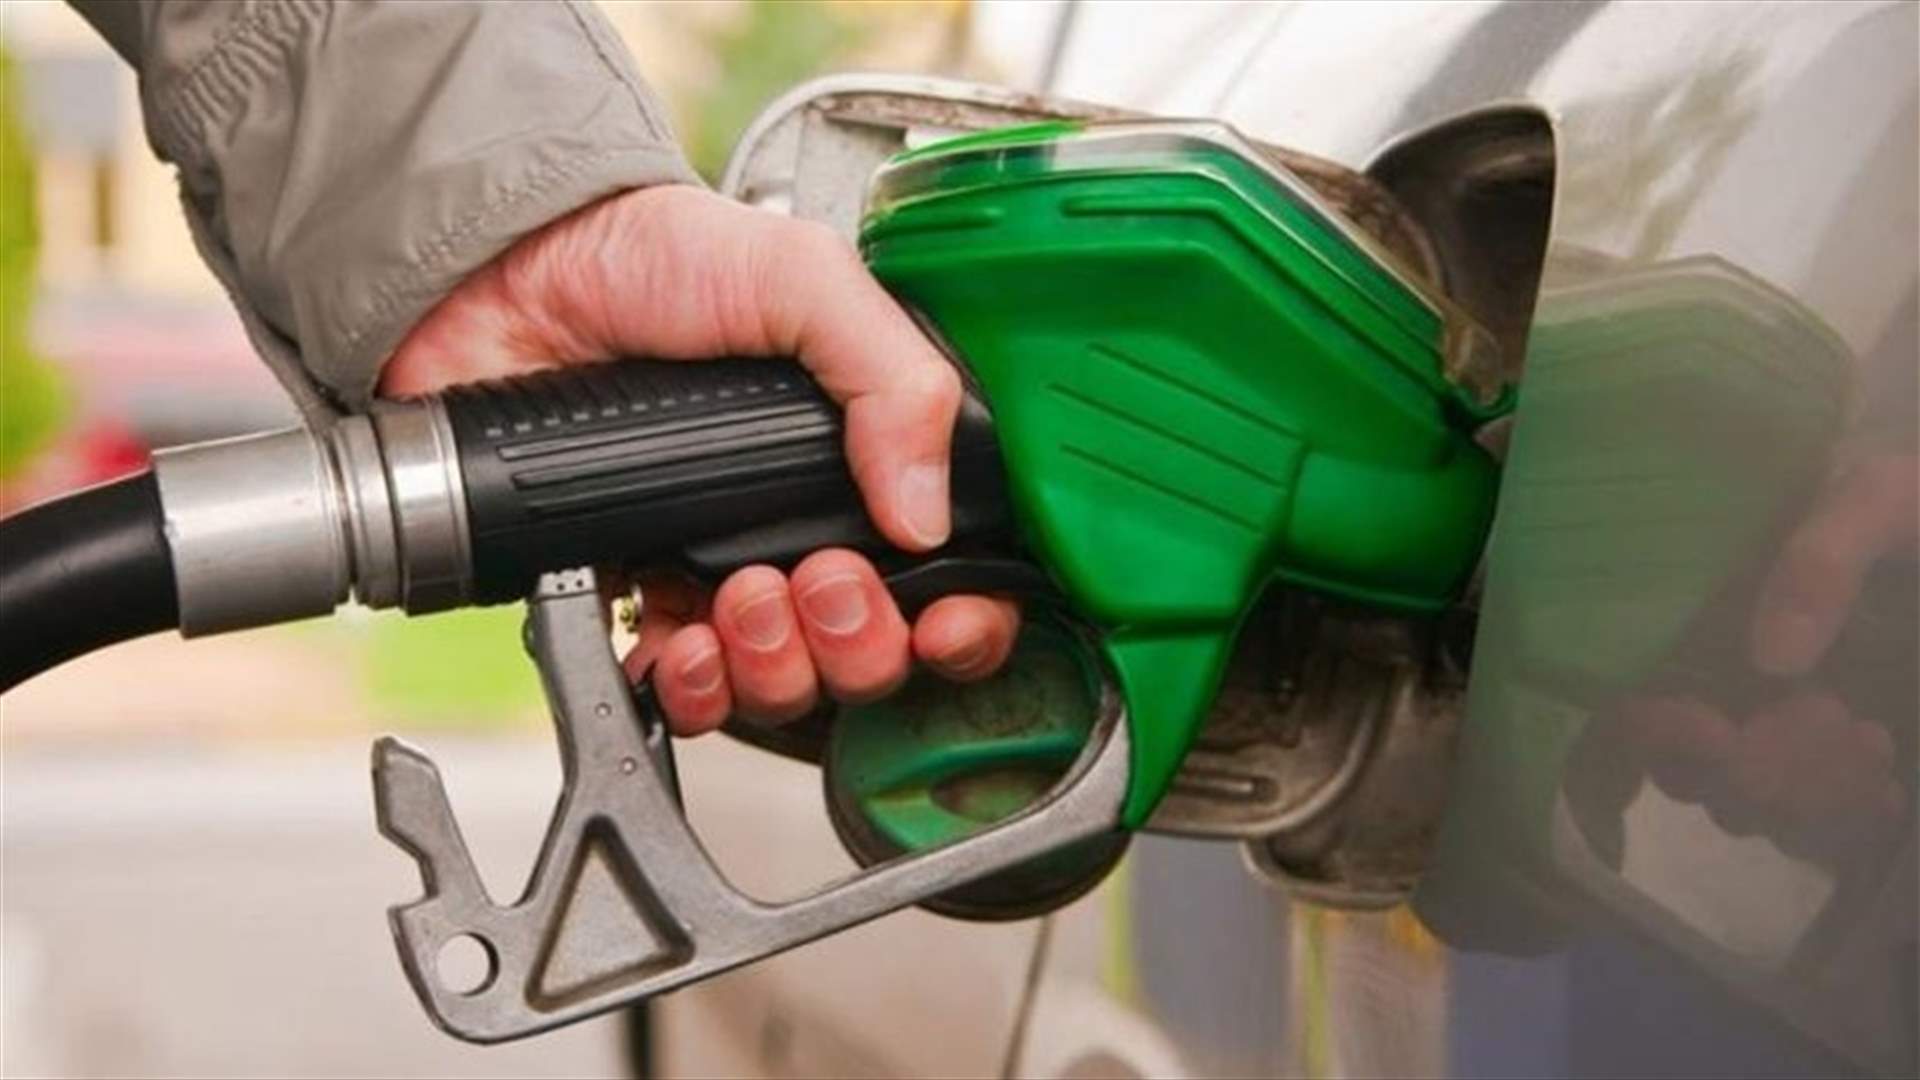 Fuel prices increase for the first time in weeks